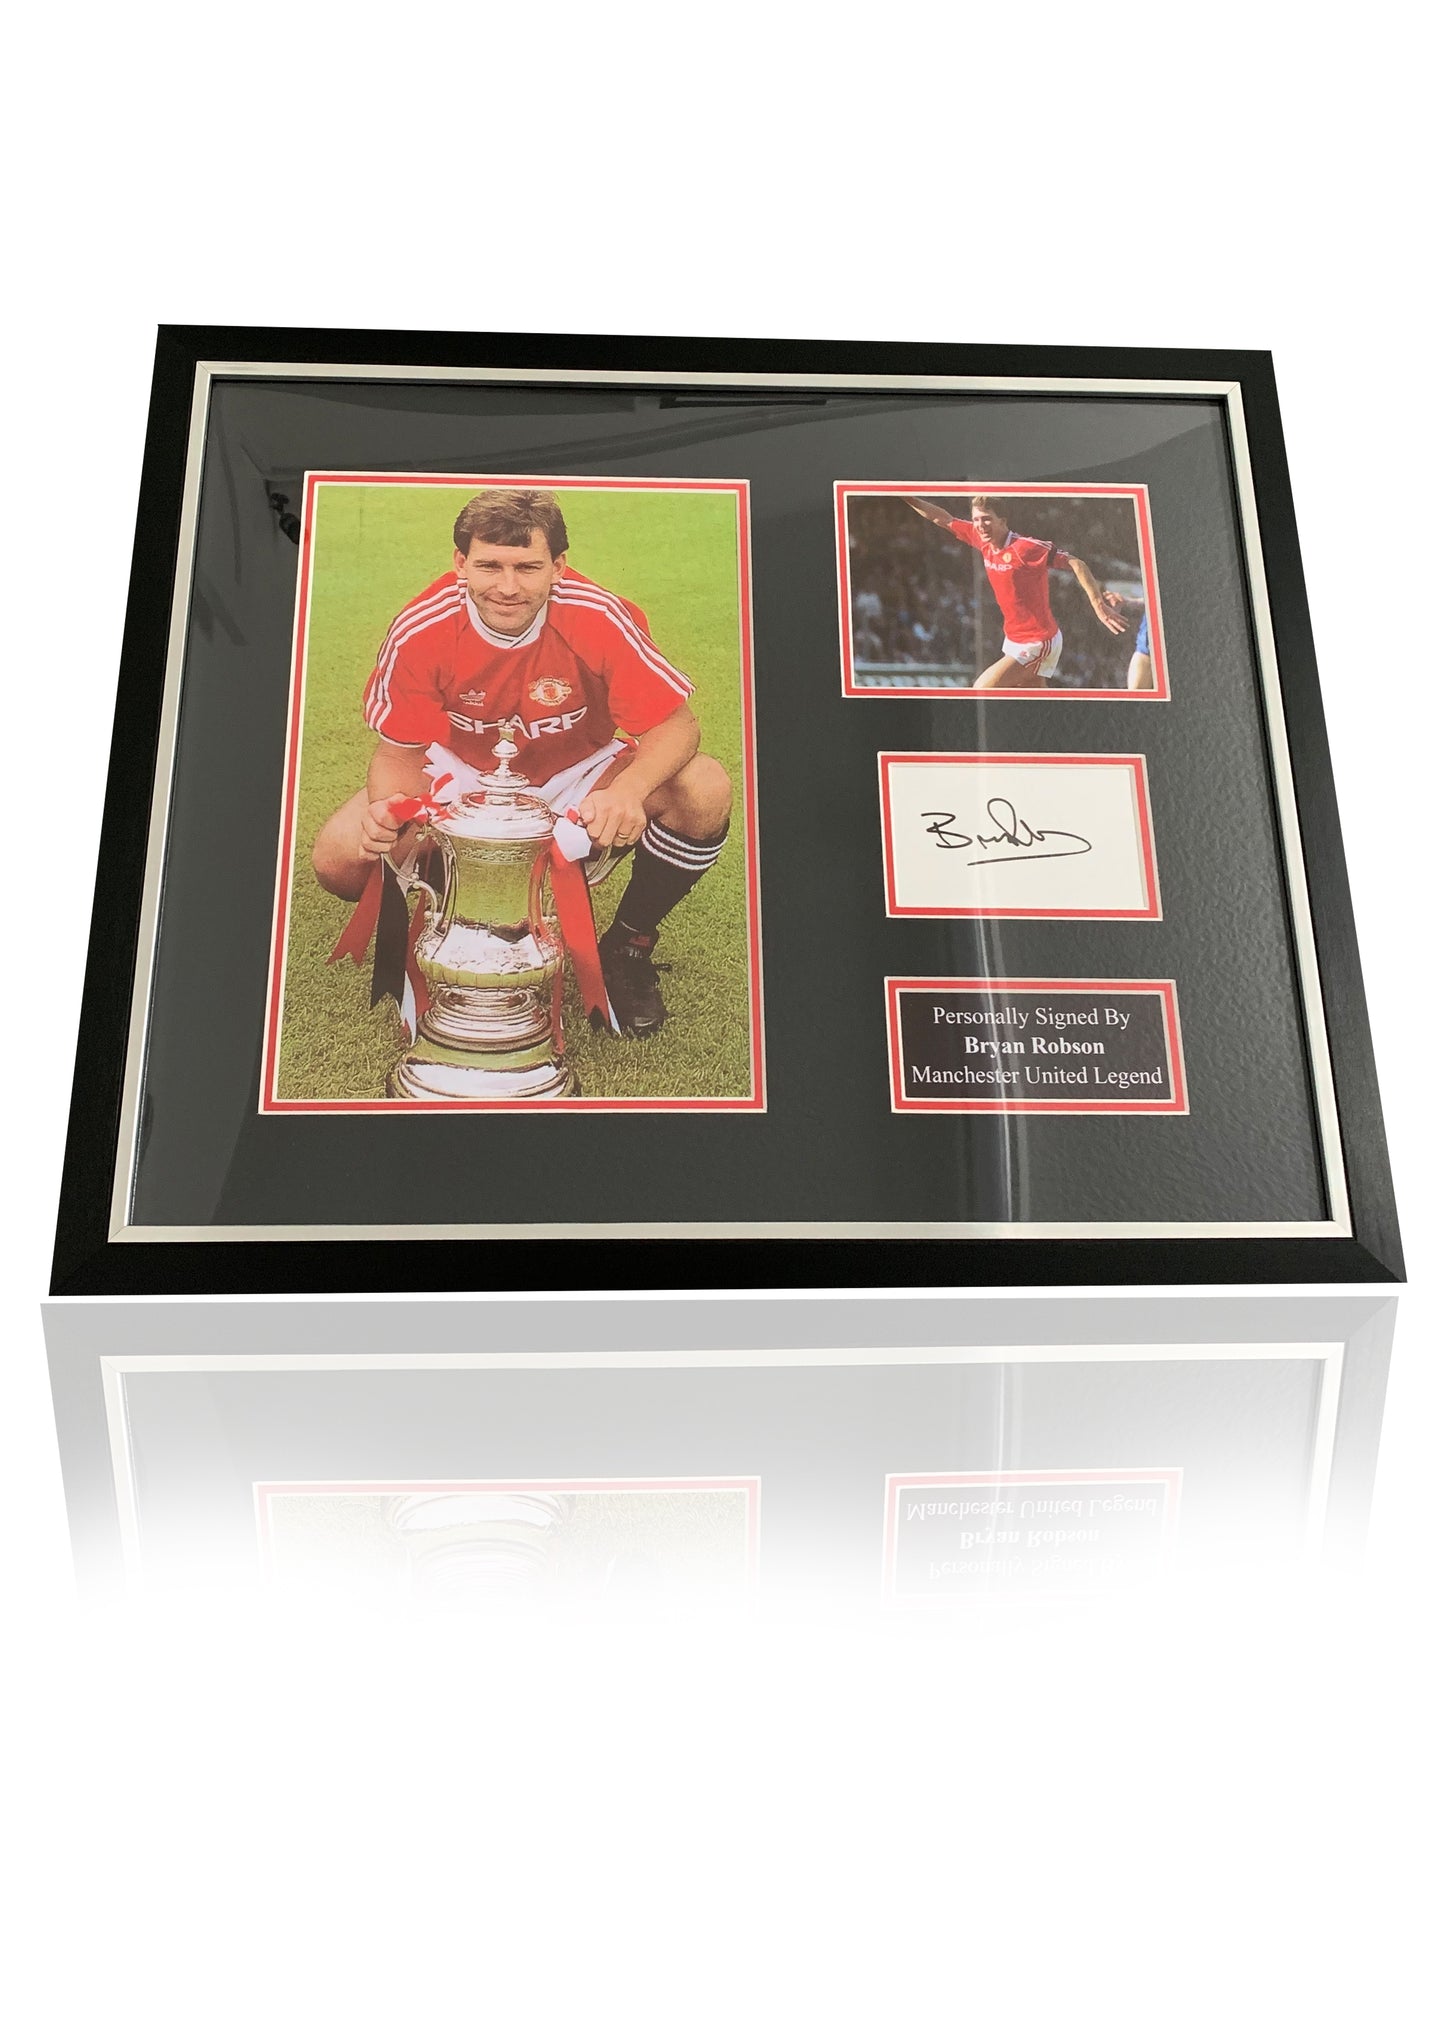 Bryan Robson Manchester United signed framed photo card montage